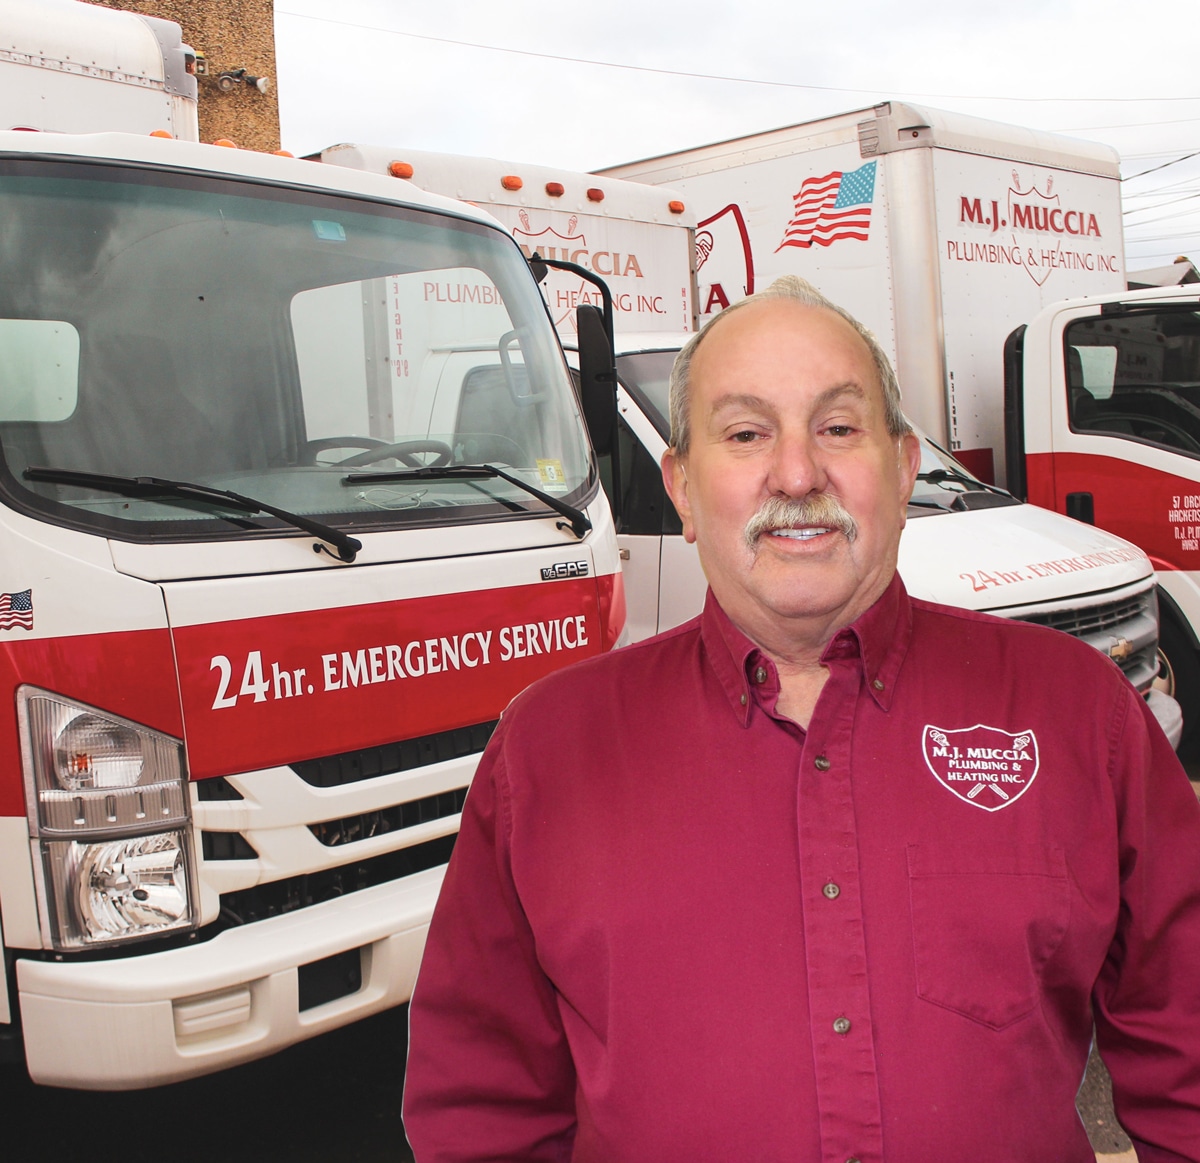 Mike Muccia founder and plumber